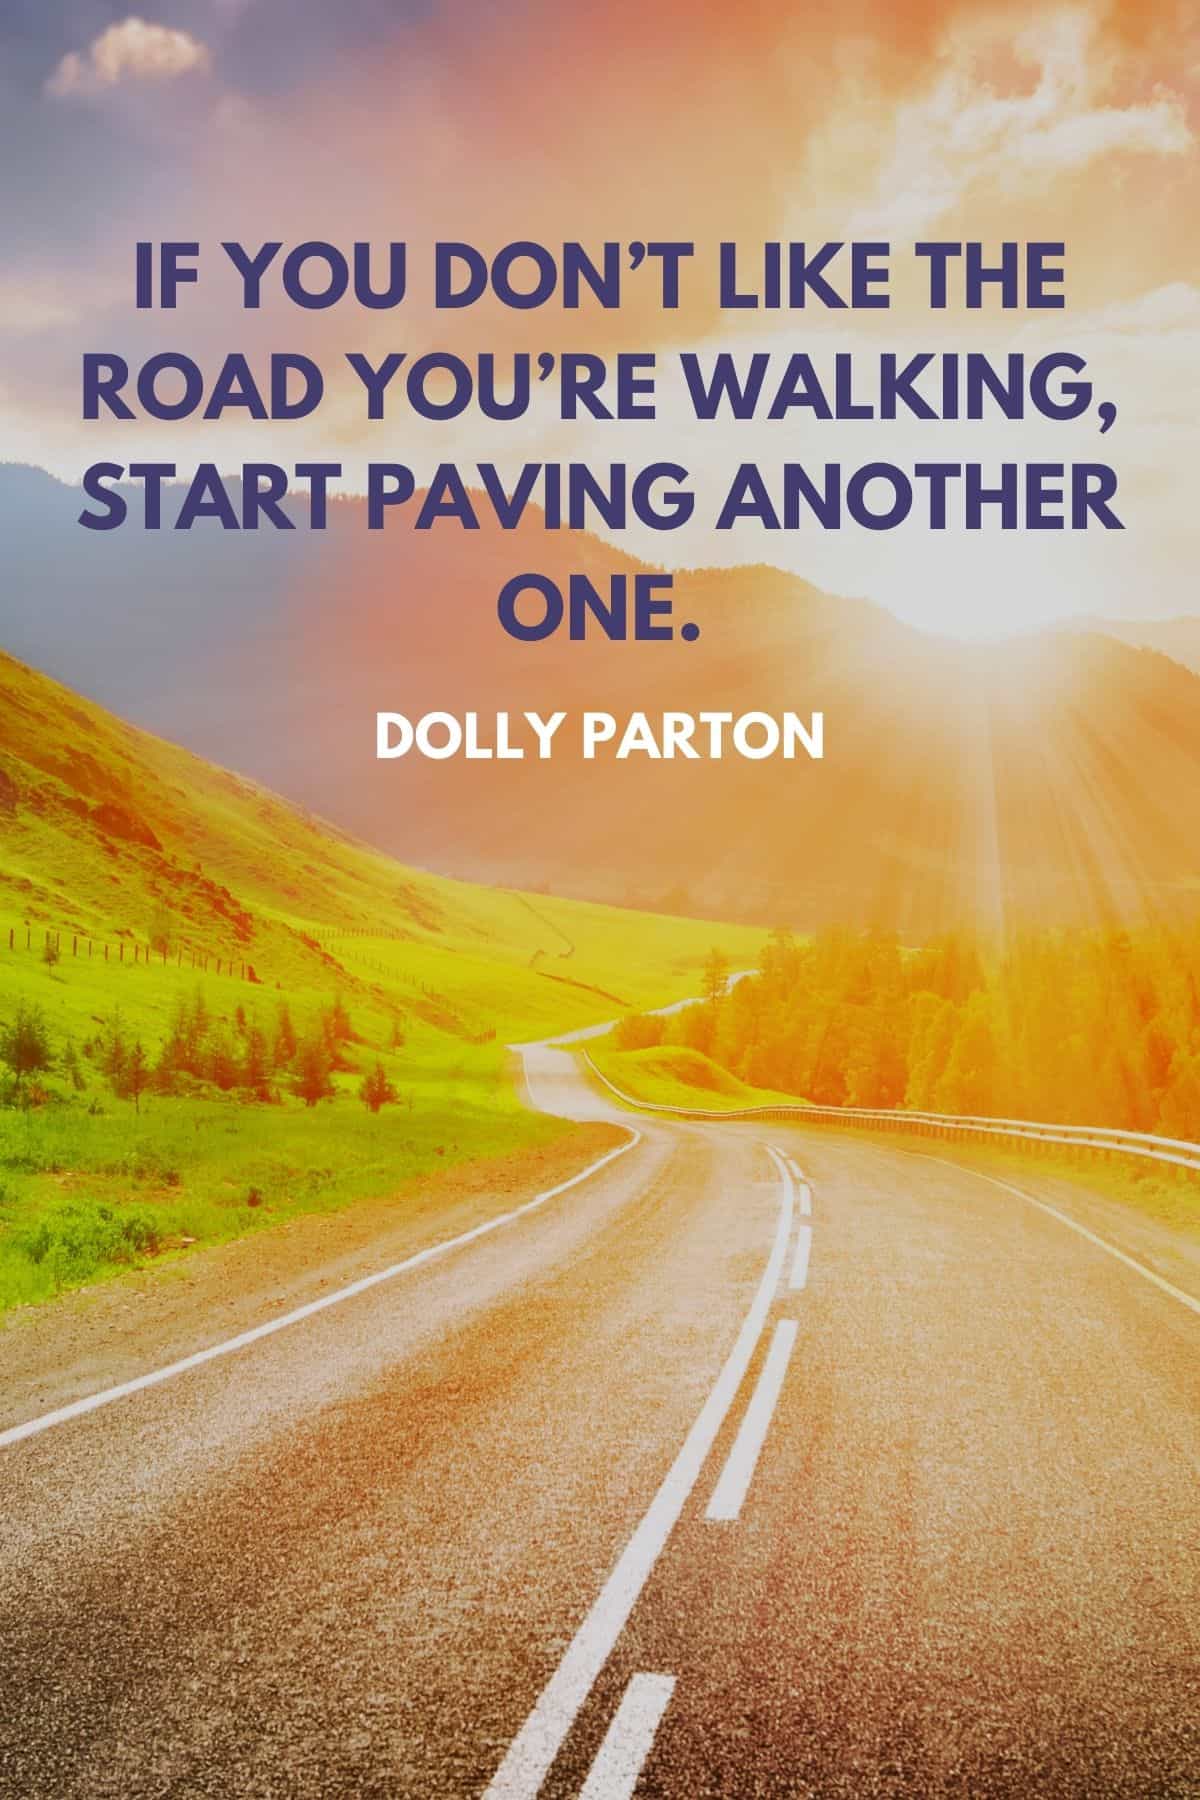 picture of a road with the words overlayed: “If you don’t like the road you’re walking, start paving another one.” —Dolly Parton.